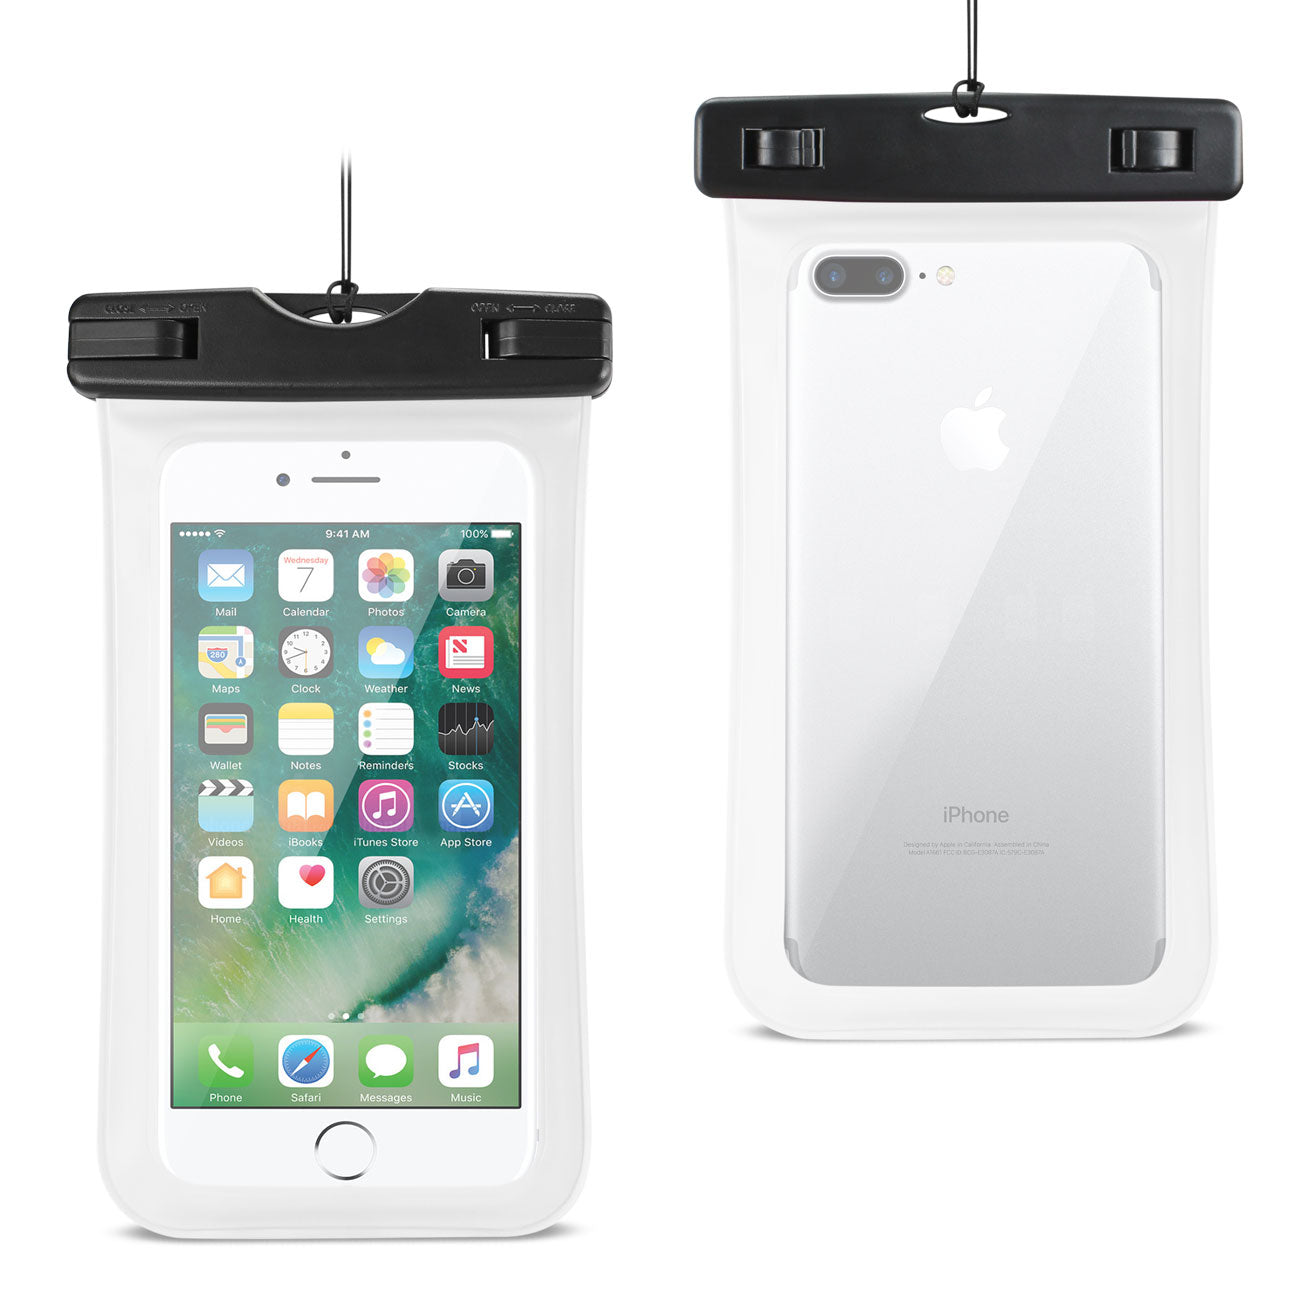 Reiko Waterproof Case With Touch Screen For 5.5X3X0.5 Inch Devices With Wrist Strap In White